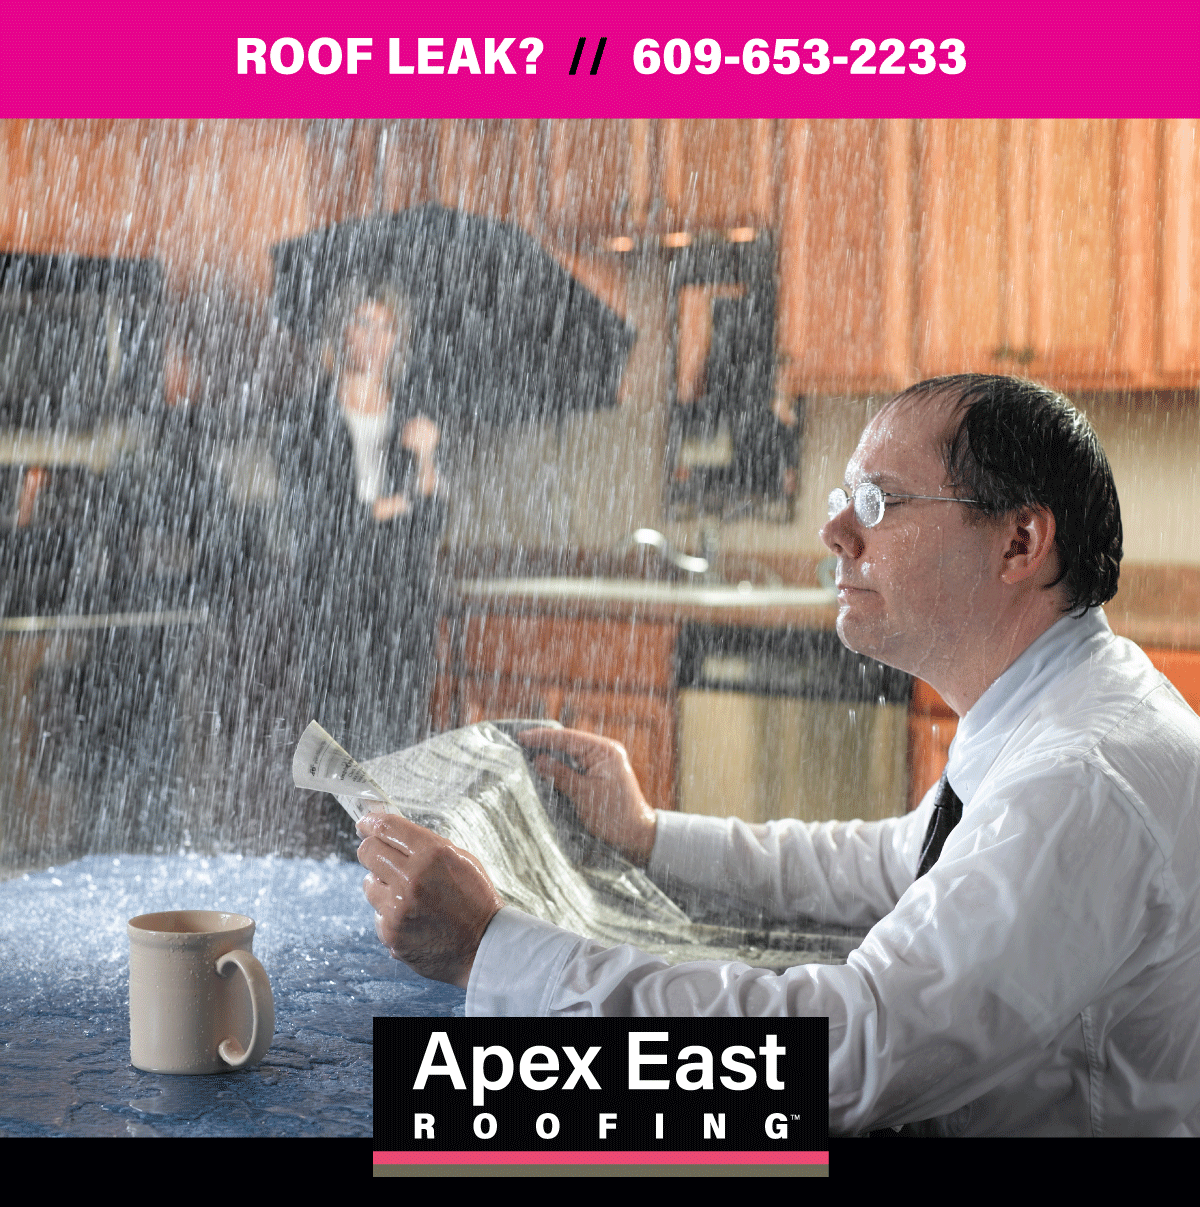 How to find a roofing leak, New Jersey?